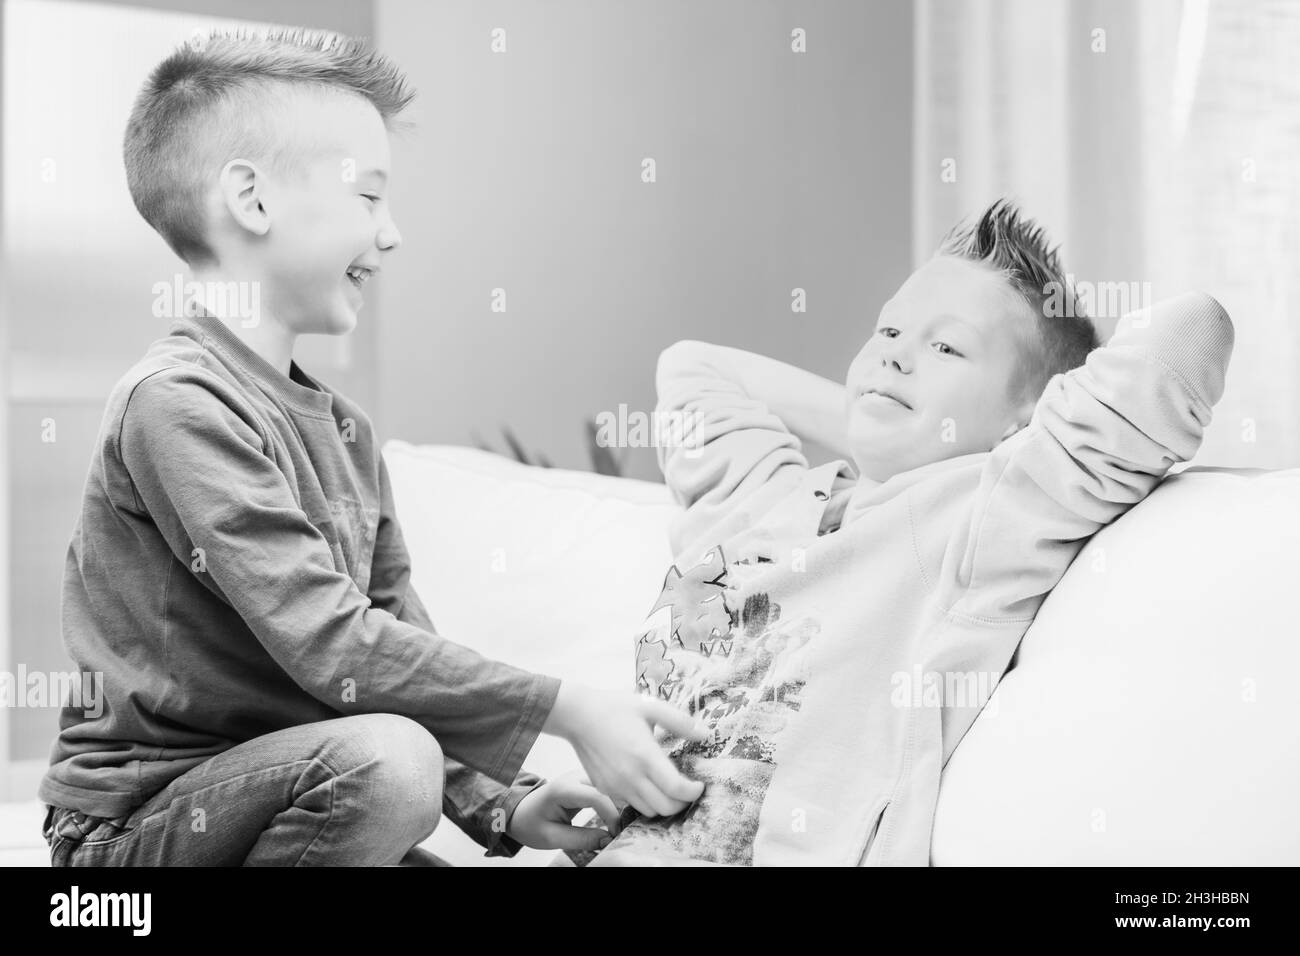 Greyscale image of two young brothers having fun playing together on a sofa at hole laughing and tickling each other Stock Photo